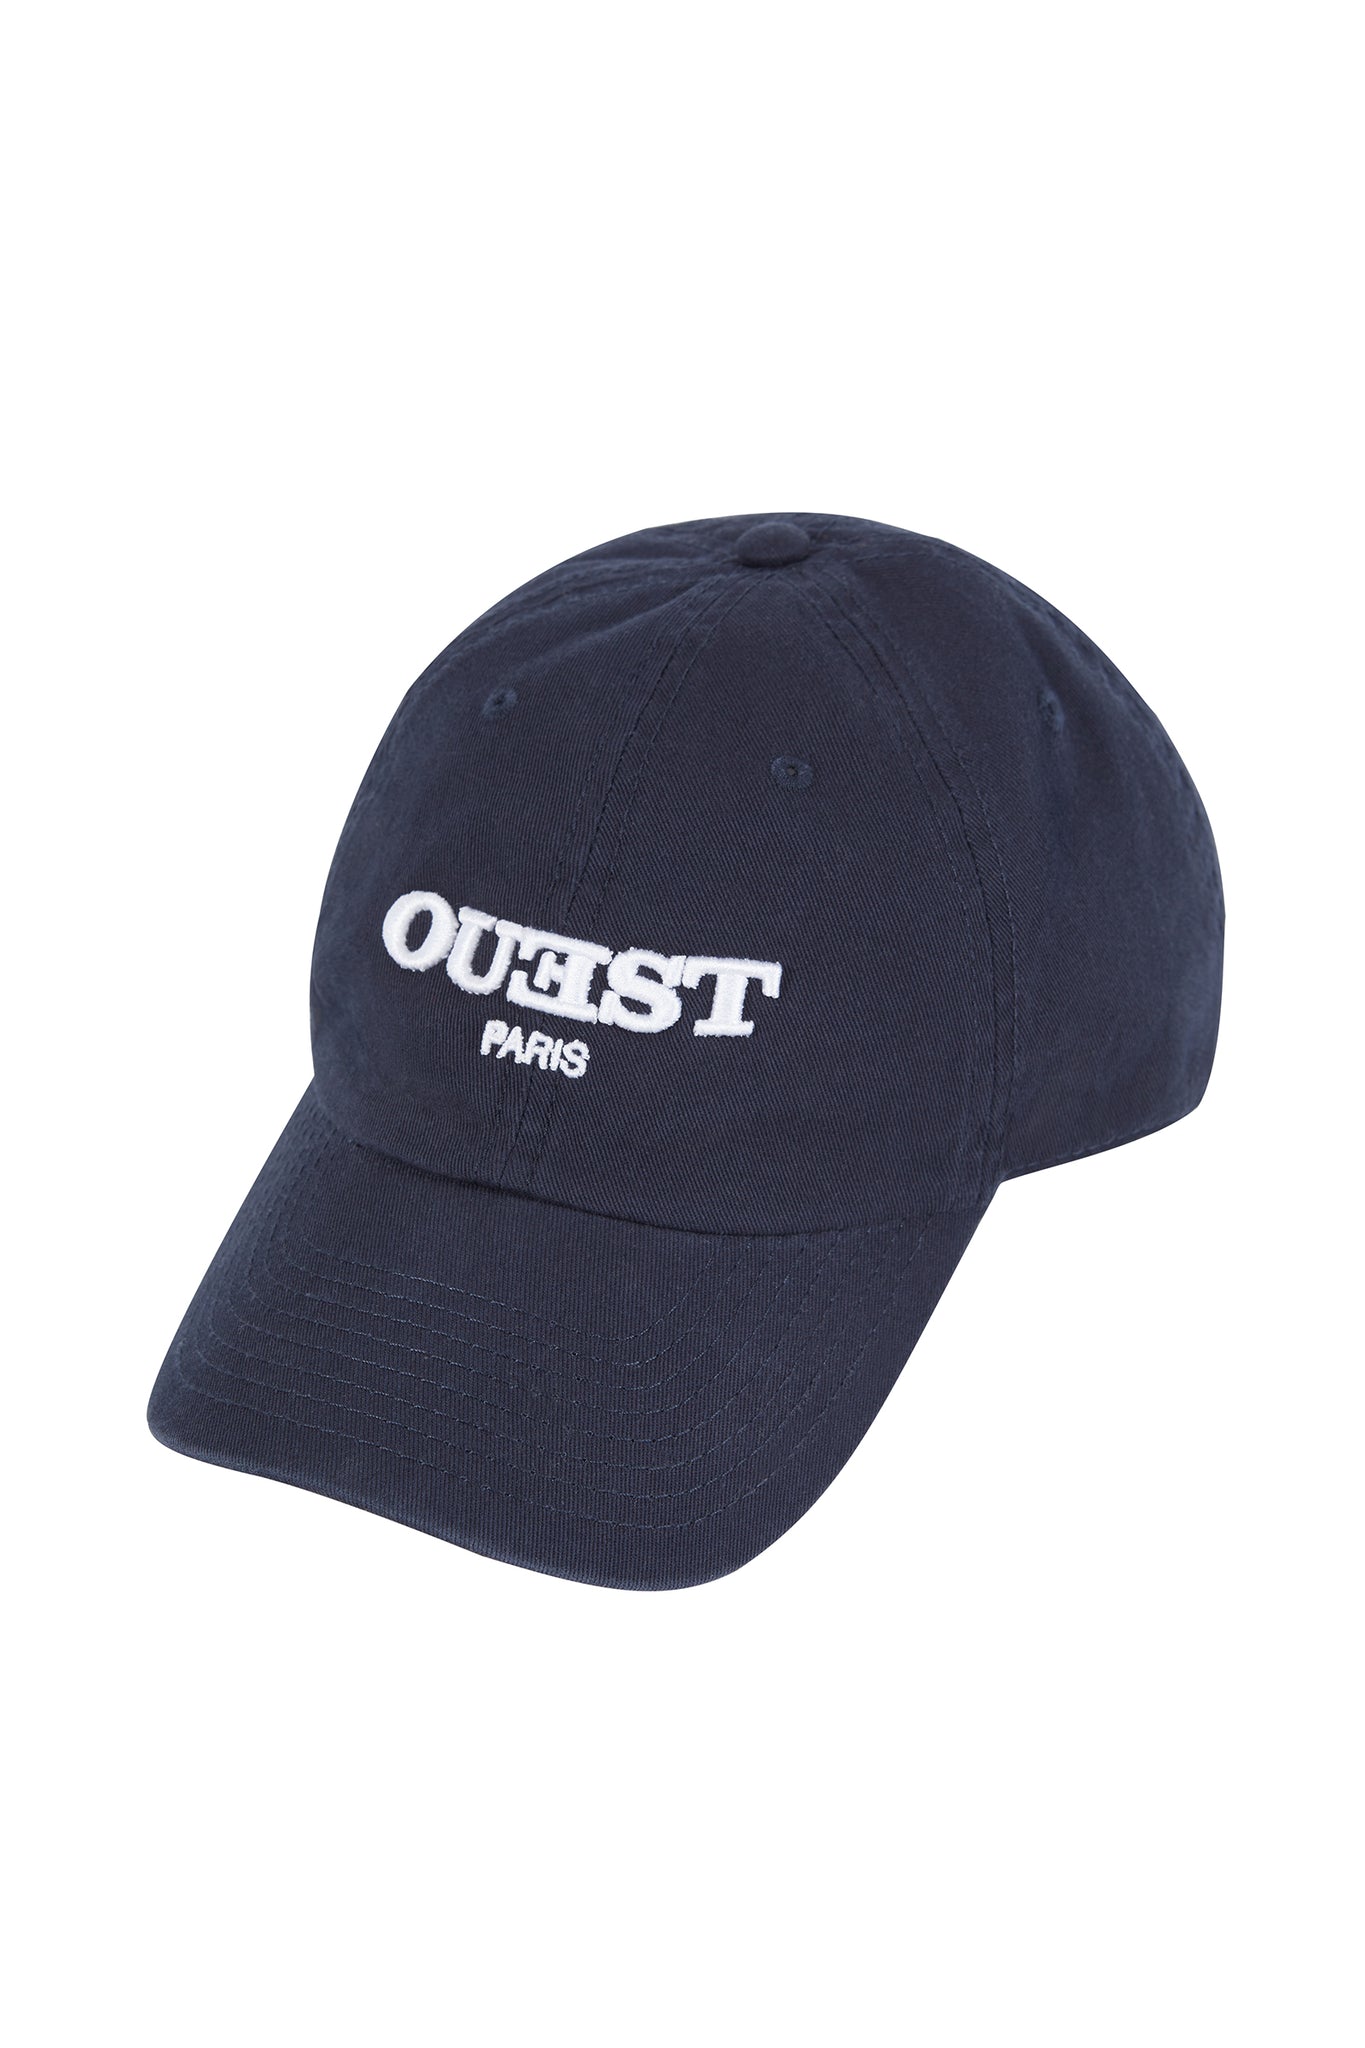 THE LOGO BASEBALL HAT IN NAVY COTTON TWILL